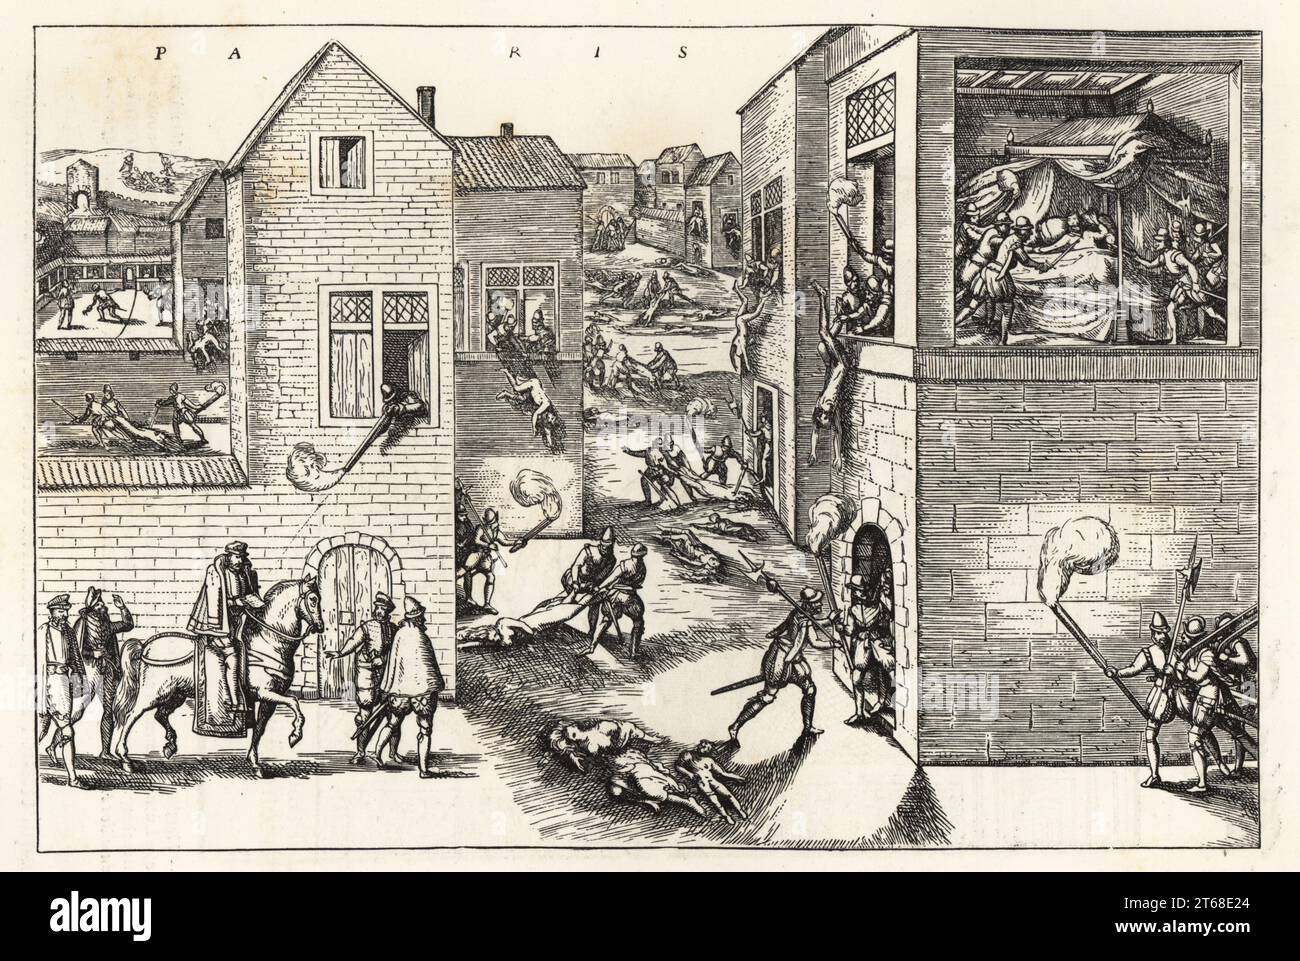 The Saint Bartholomews Day Massacre of the Huguenots in Paris, 24 August 1572. Admiral Coligny wounded by a musketeer at left, and finally stabbed in his hotel bed on rue Bethisy by Besme and defenestrated at right. Women and children slaughtered in the streets. From a German print by Frans Hogenberg. Massacre de la Saint Barthelemy, a Paris. woodcut, engraving, Etienne Huyot, Jules Huyot, Paul Lacroix, La Vie Militaire et Religieuse au Moyen Age et a lEpoque de la Renaissance, Military, Religious, Life, Middle Ages, Renaissance, costume, custom, Christianity, society, religion,. Stock Photo